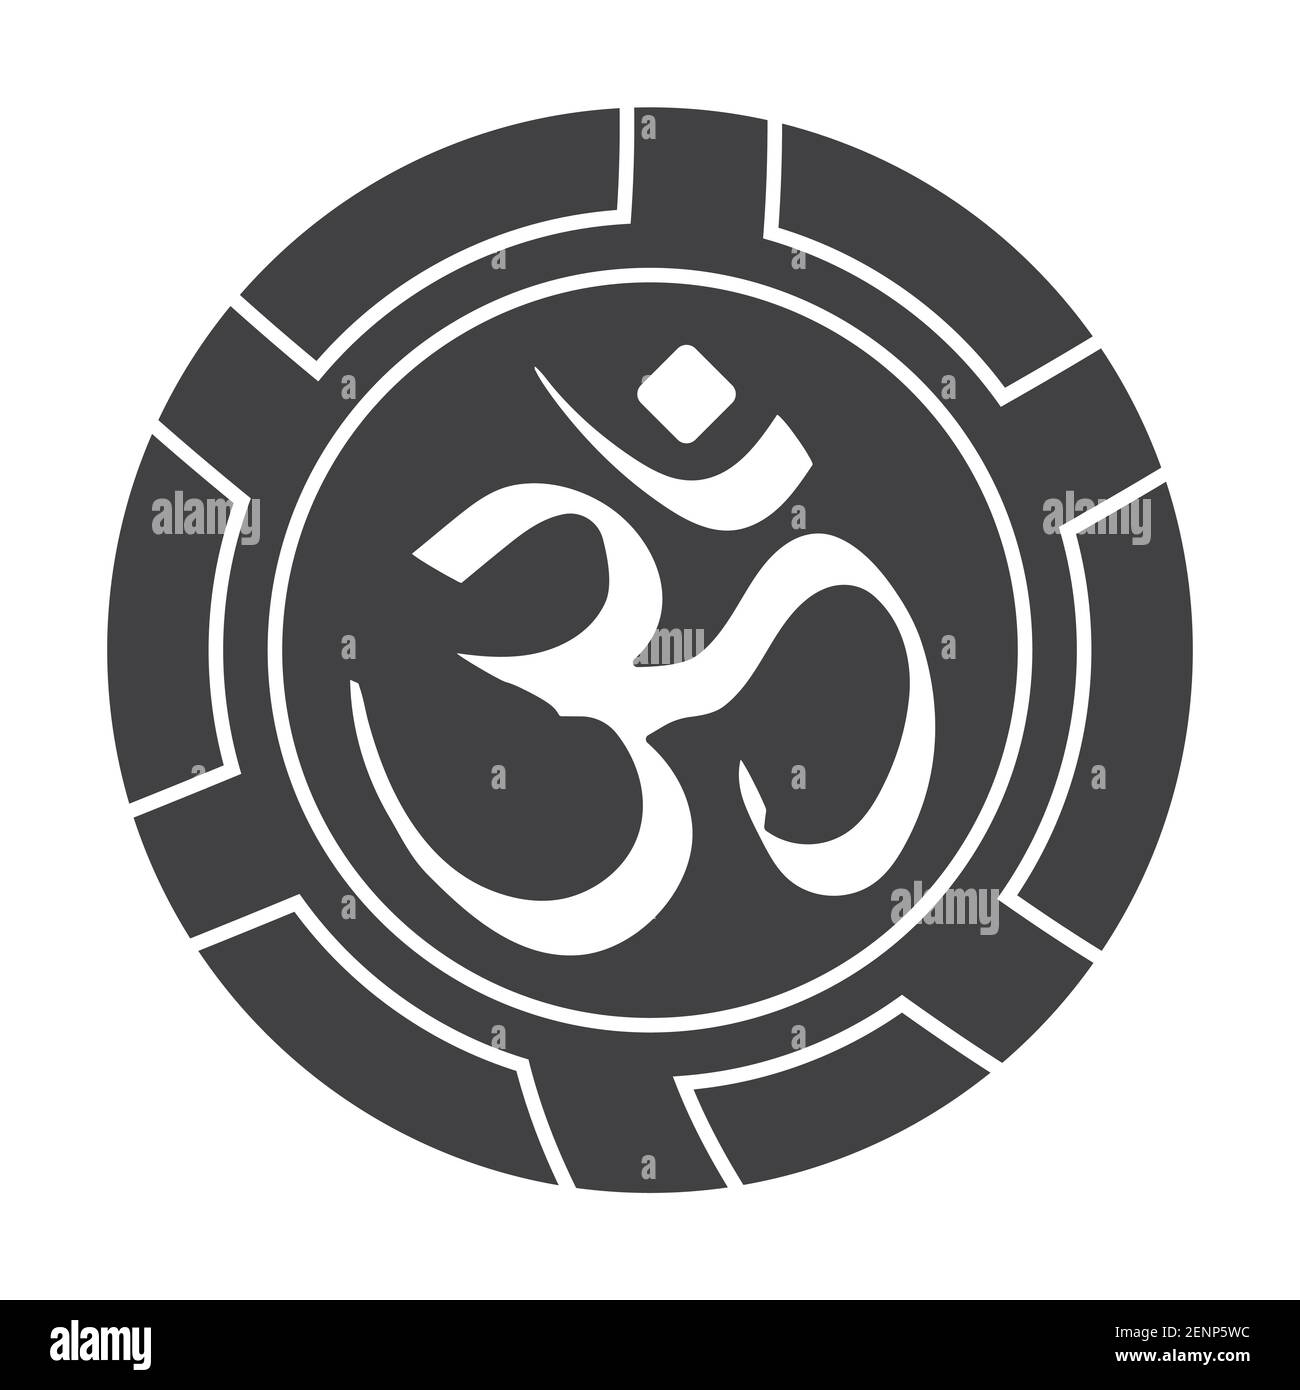 Elegant, Playful Logo Design for Aum Cafe or Cafe Aum or Om Cafe or Cafe Om.  Logo should incorporate the Aum or Om Symbol in a creative, stylized way.  This is going